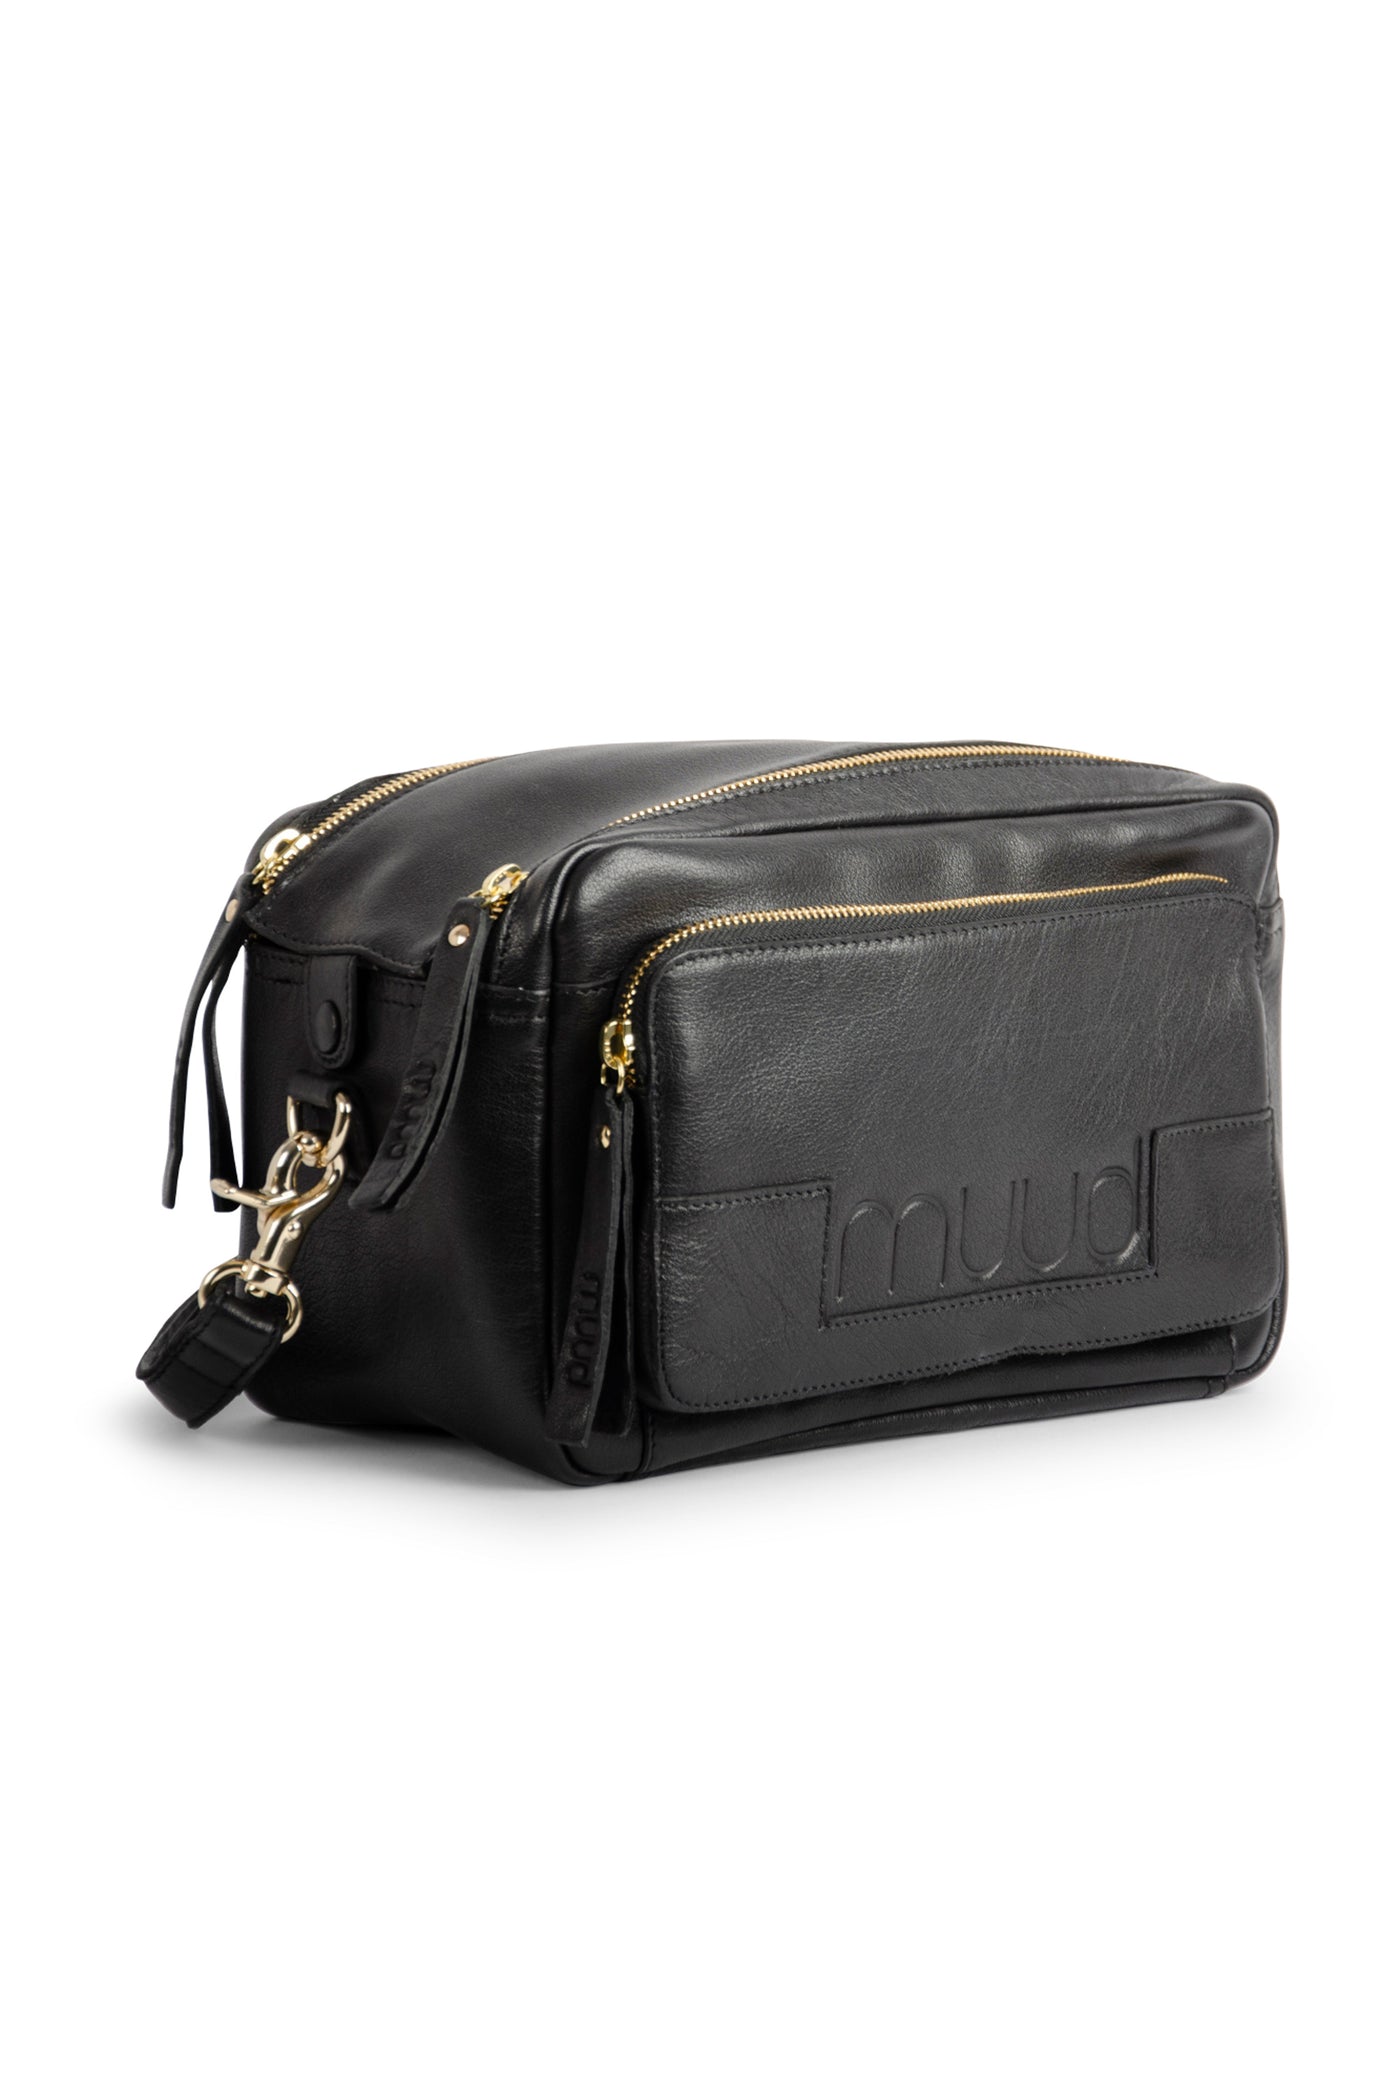 muud Stavanger - Limited edition Project Bag Limited Black